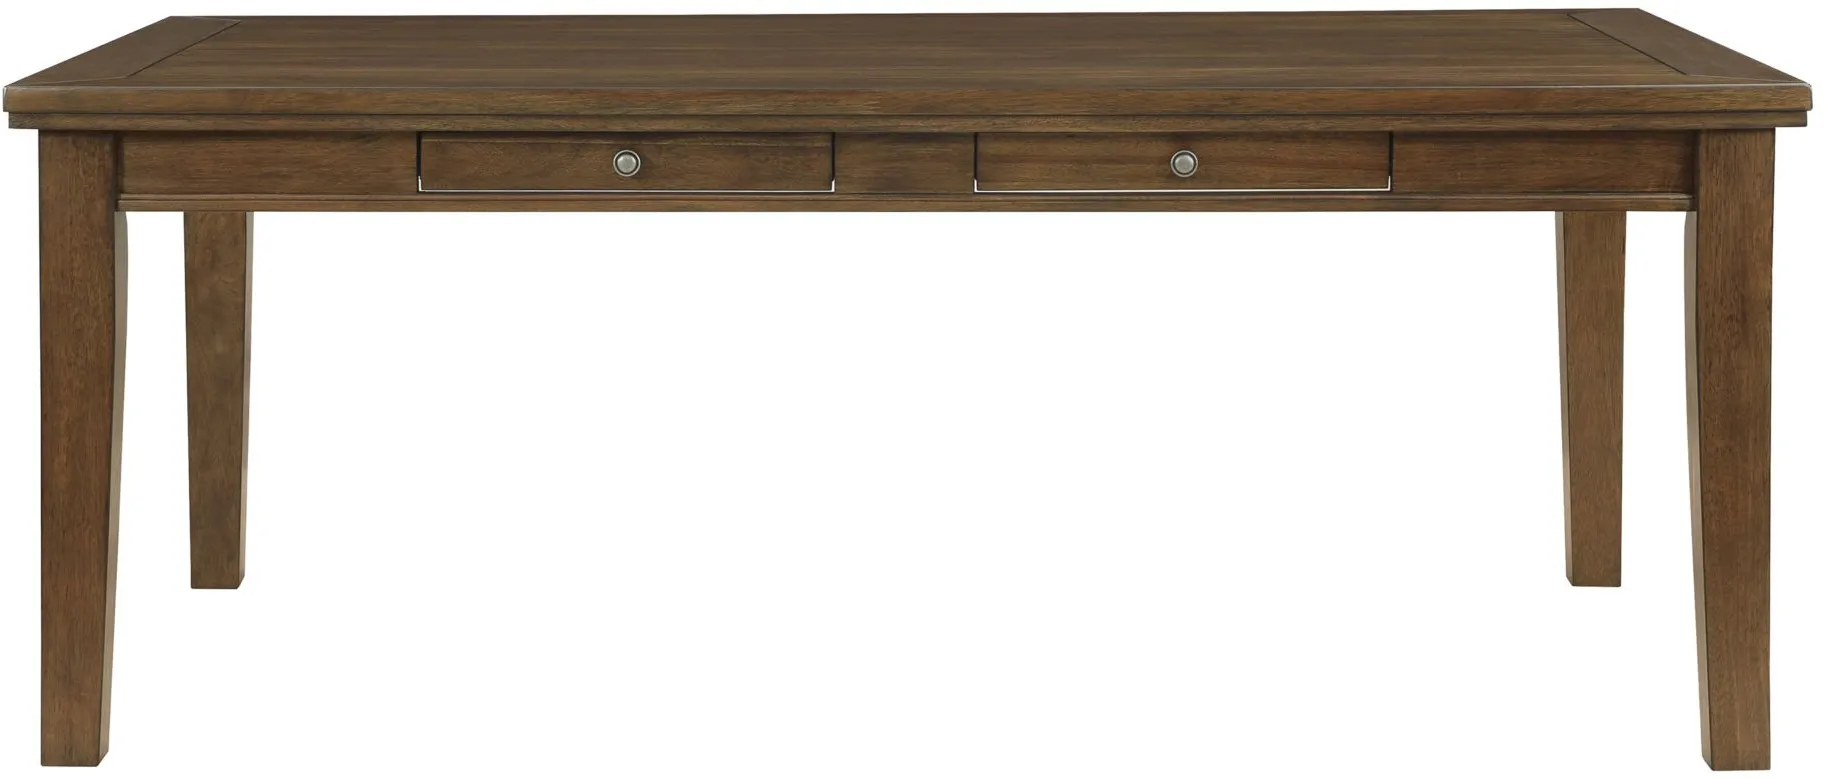 Daye Dining Room Table in Cherry by Homelegance